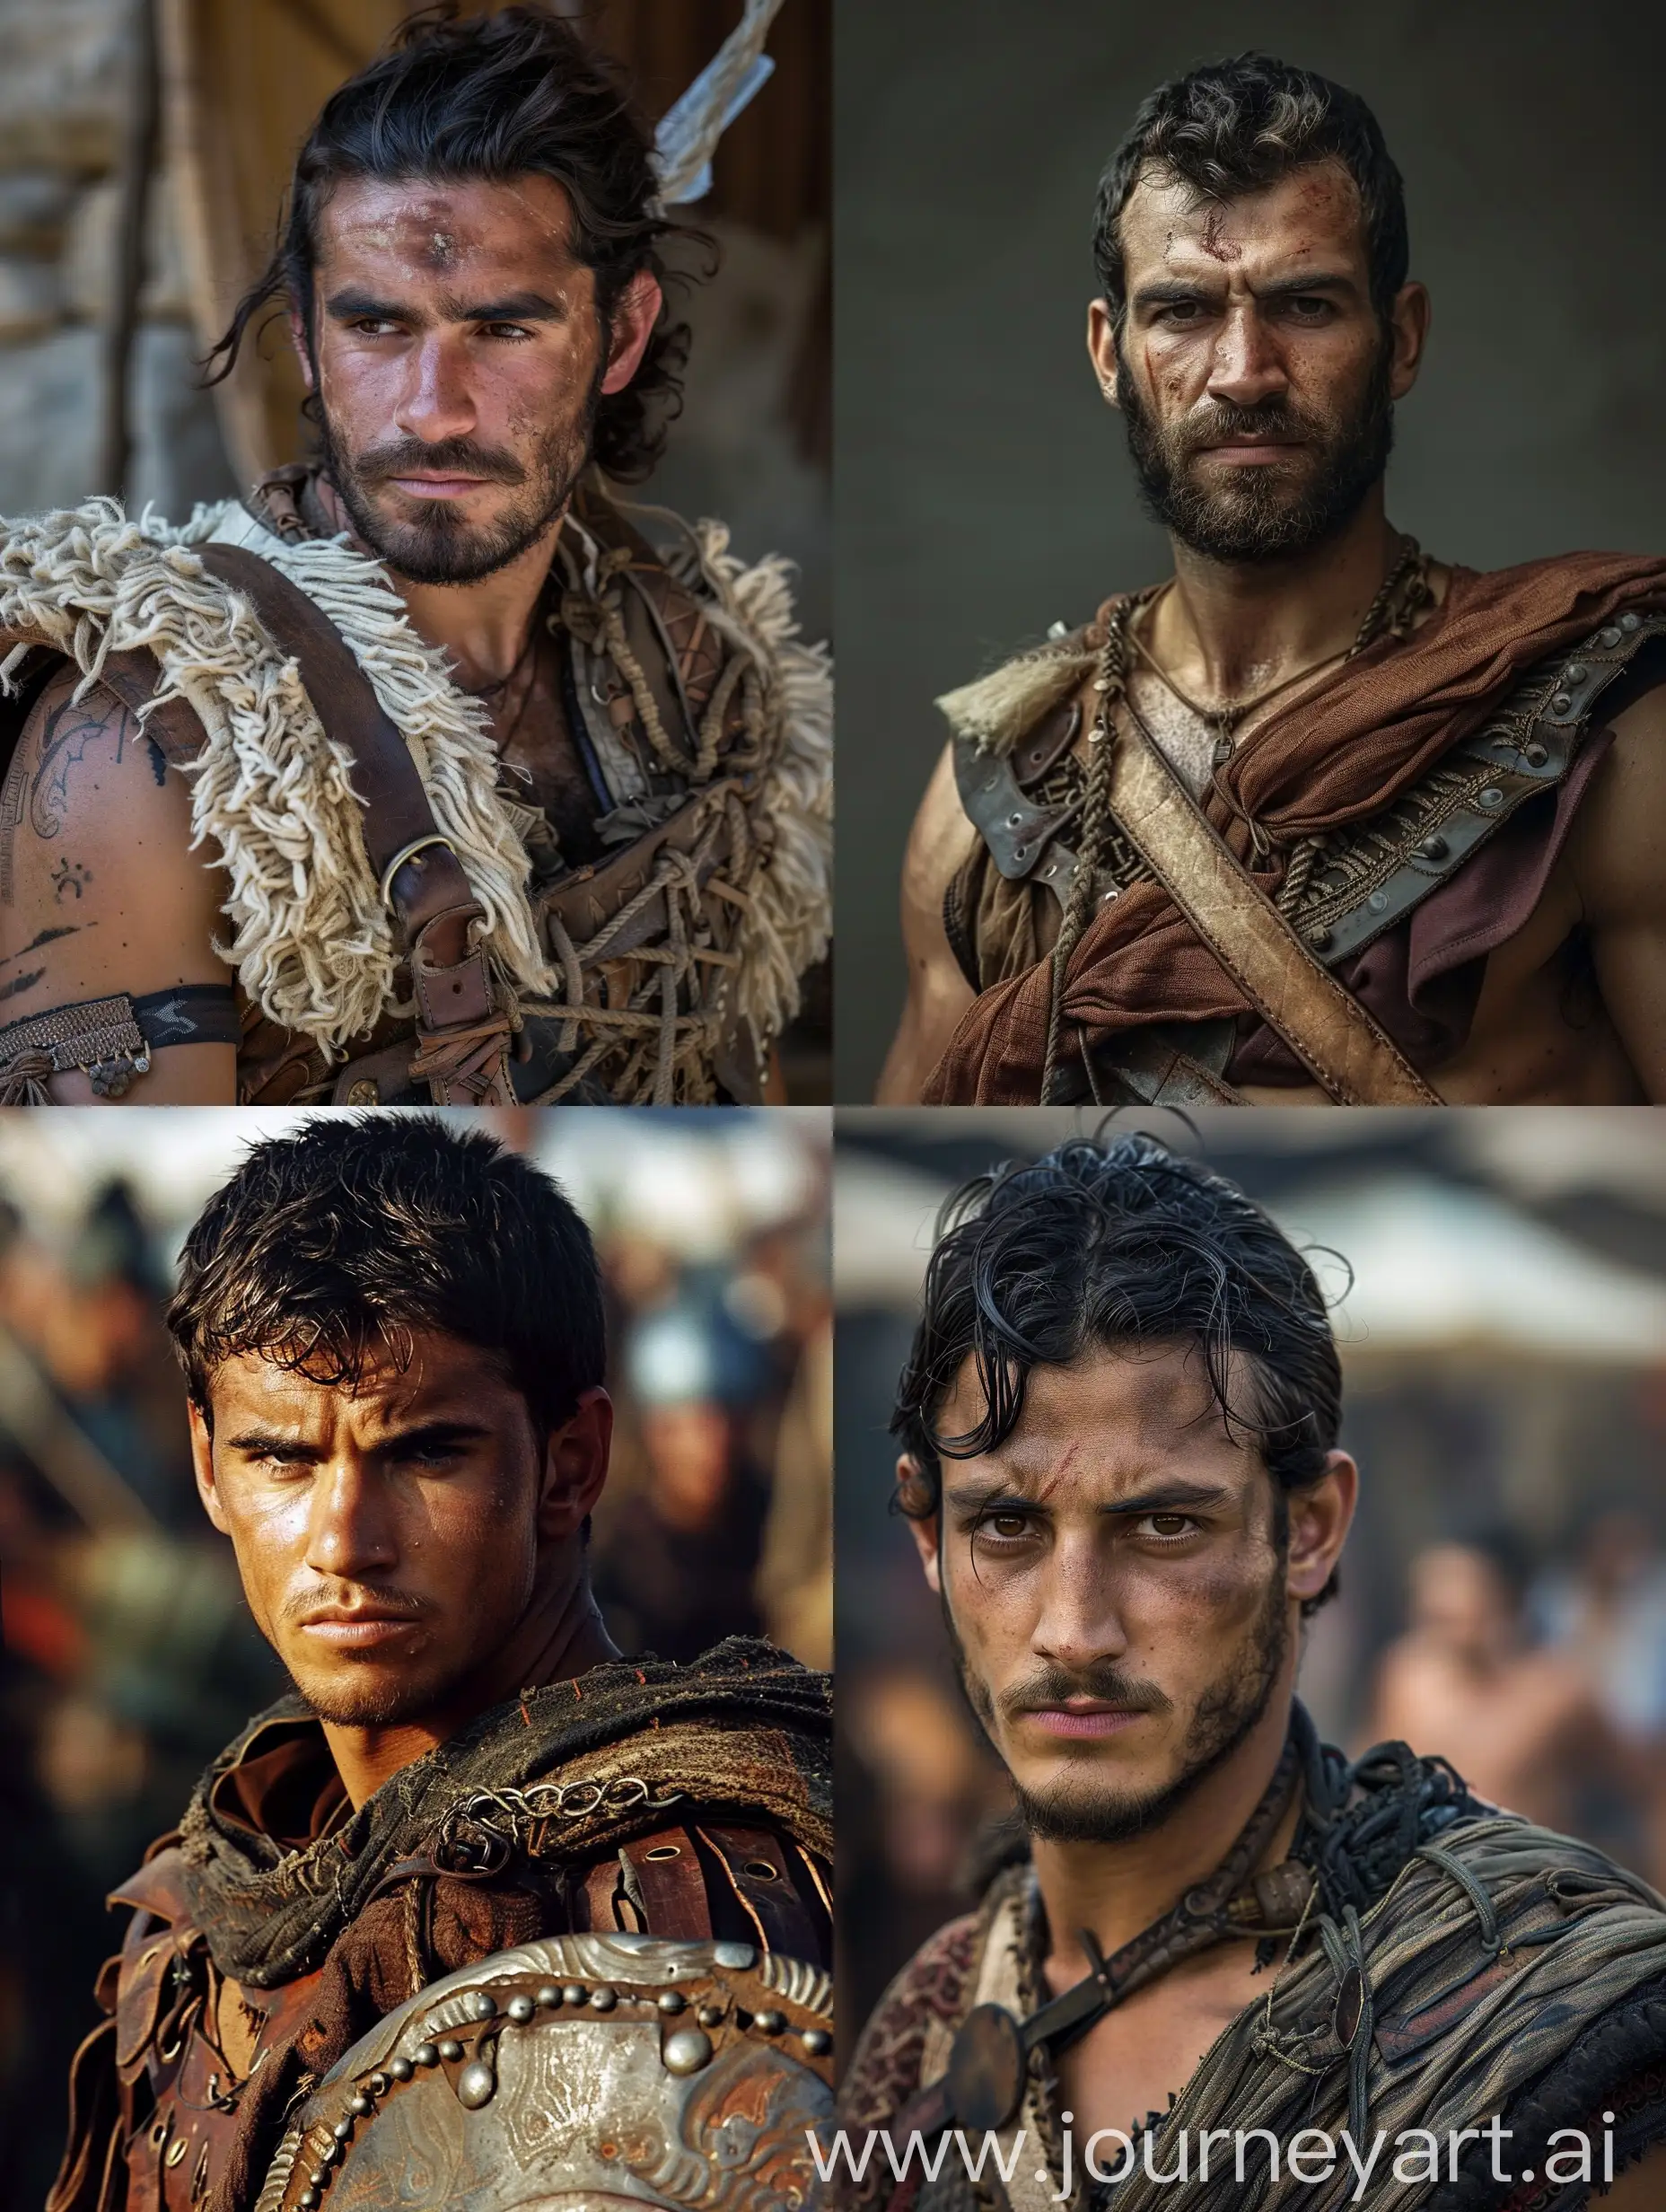 Thracian-Warrior-in-Anatolian-Tralles-Valor-and-Strength-Captured